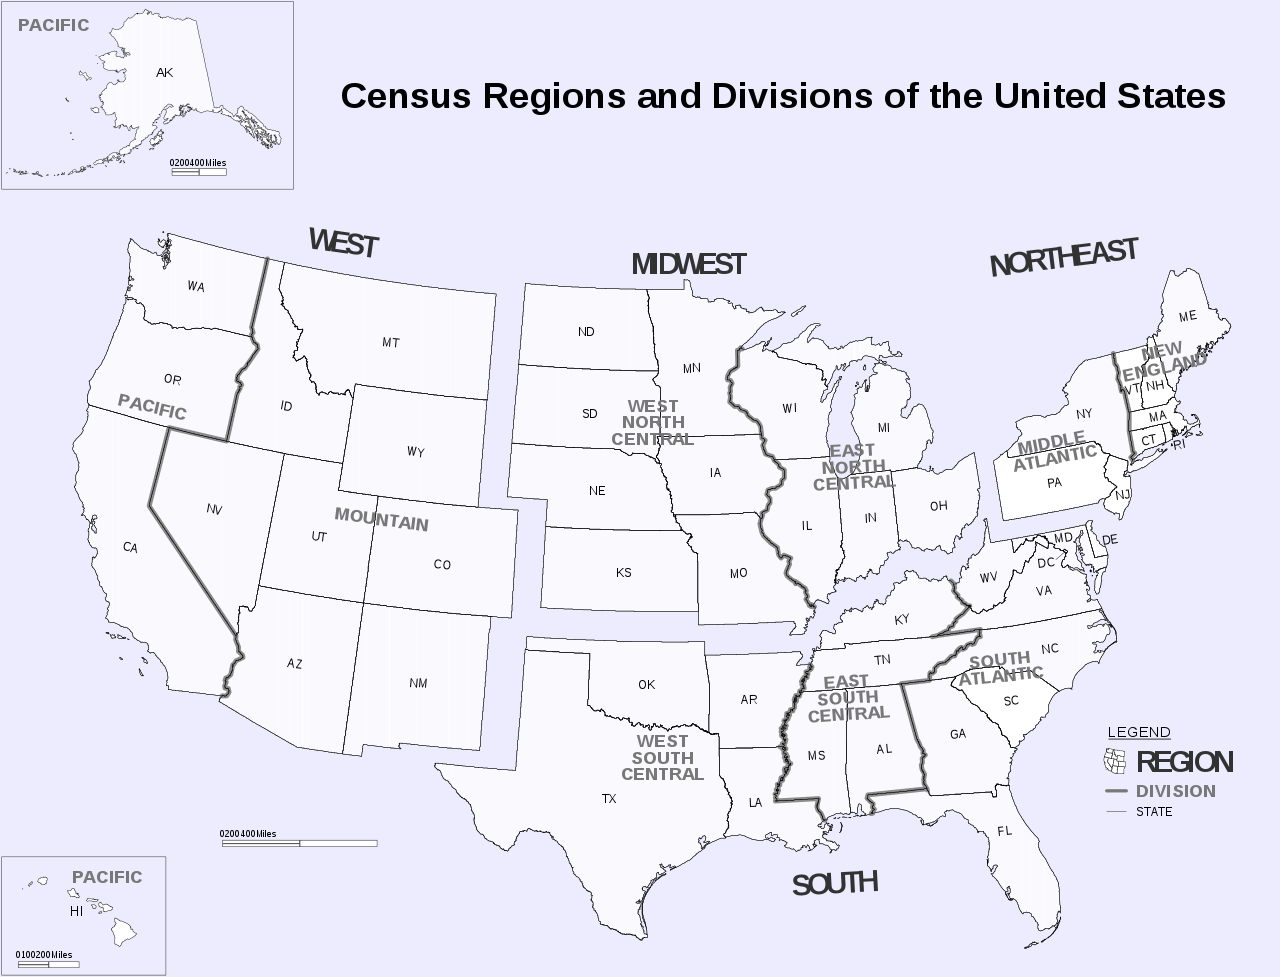 The Power of the Census